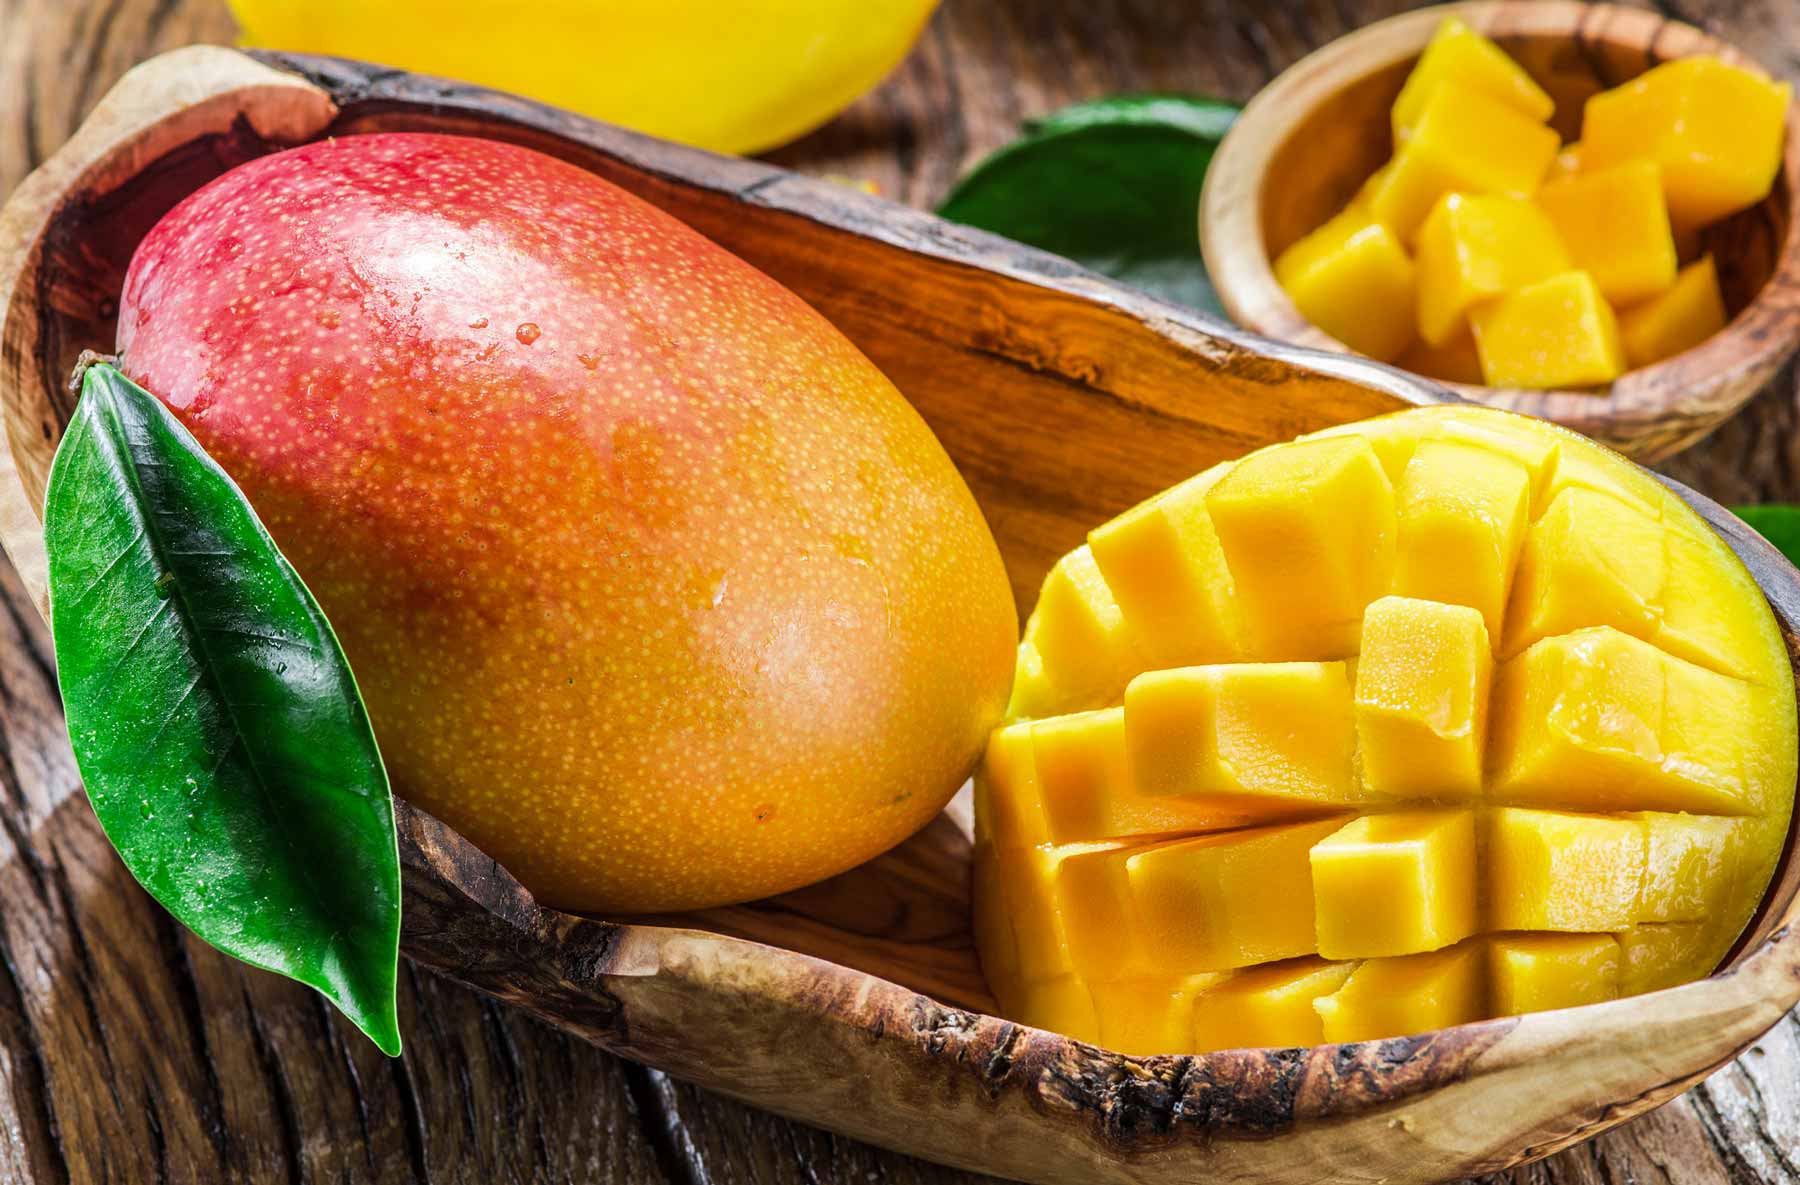 diet-and-nutrition-Mango-The-King-of-Fruit-has-Incredible-Health-Benefits.jpg